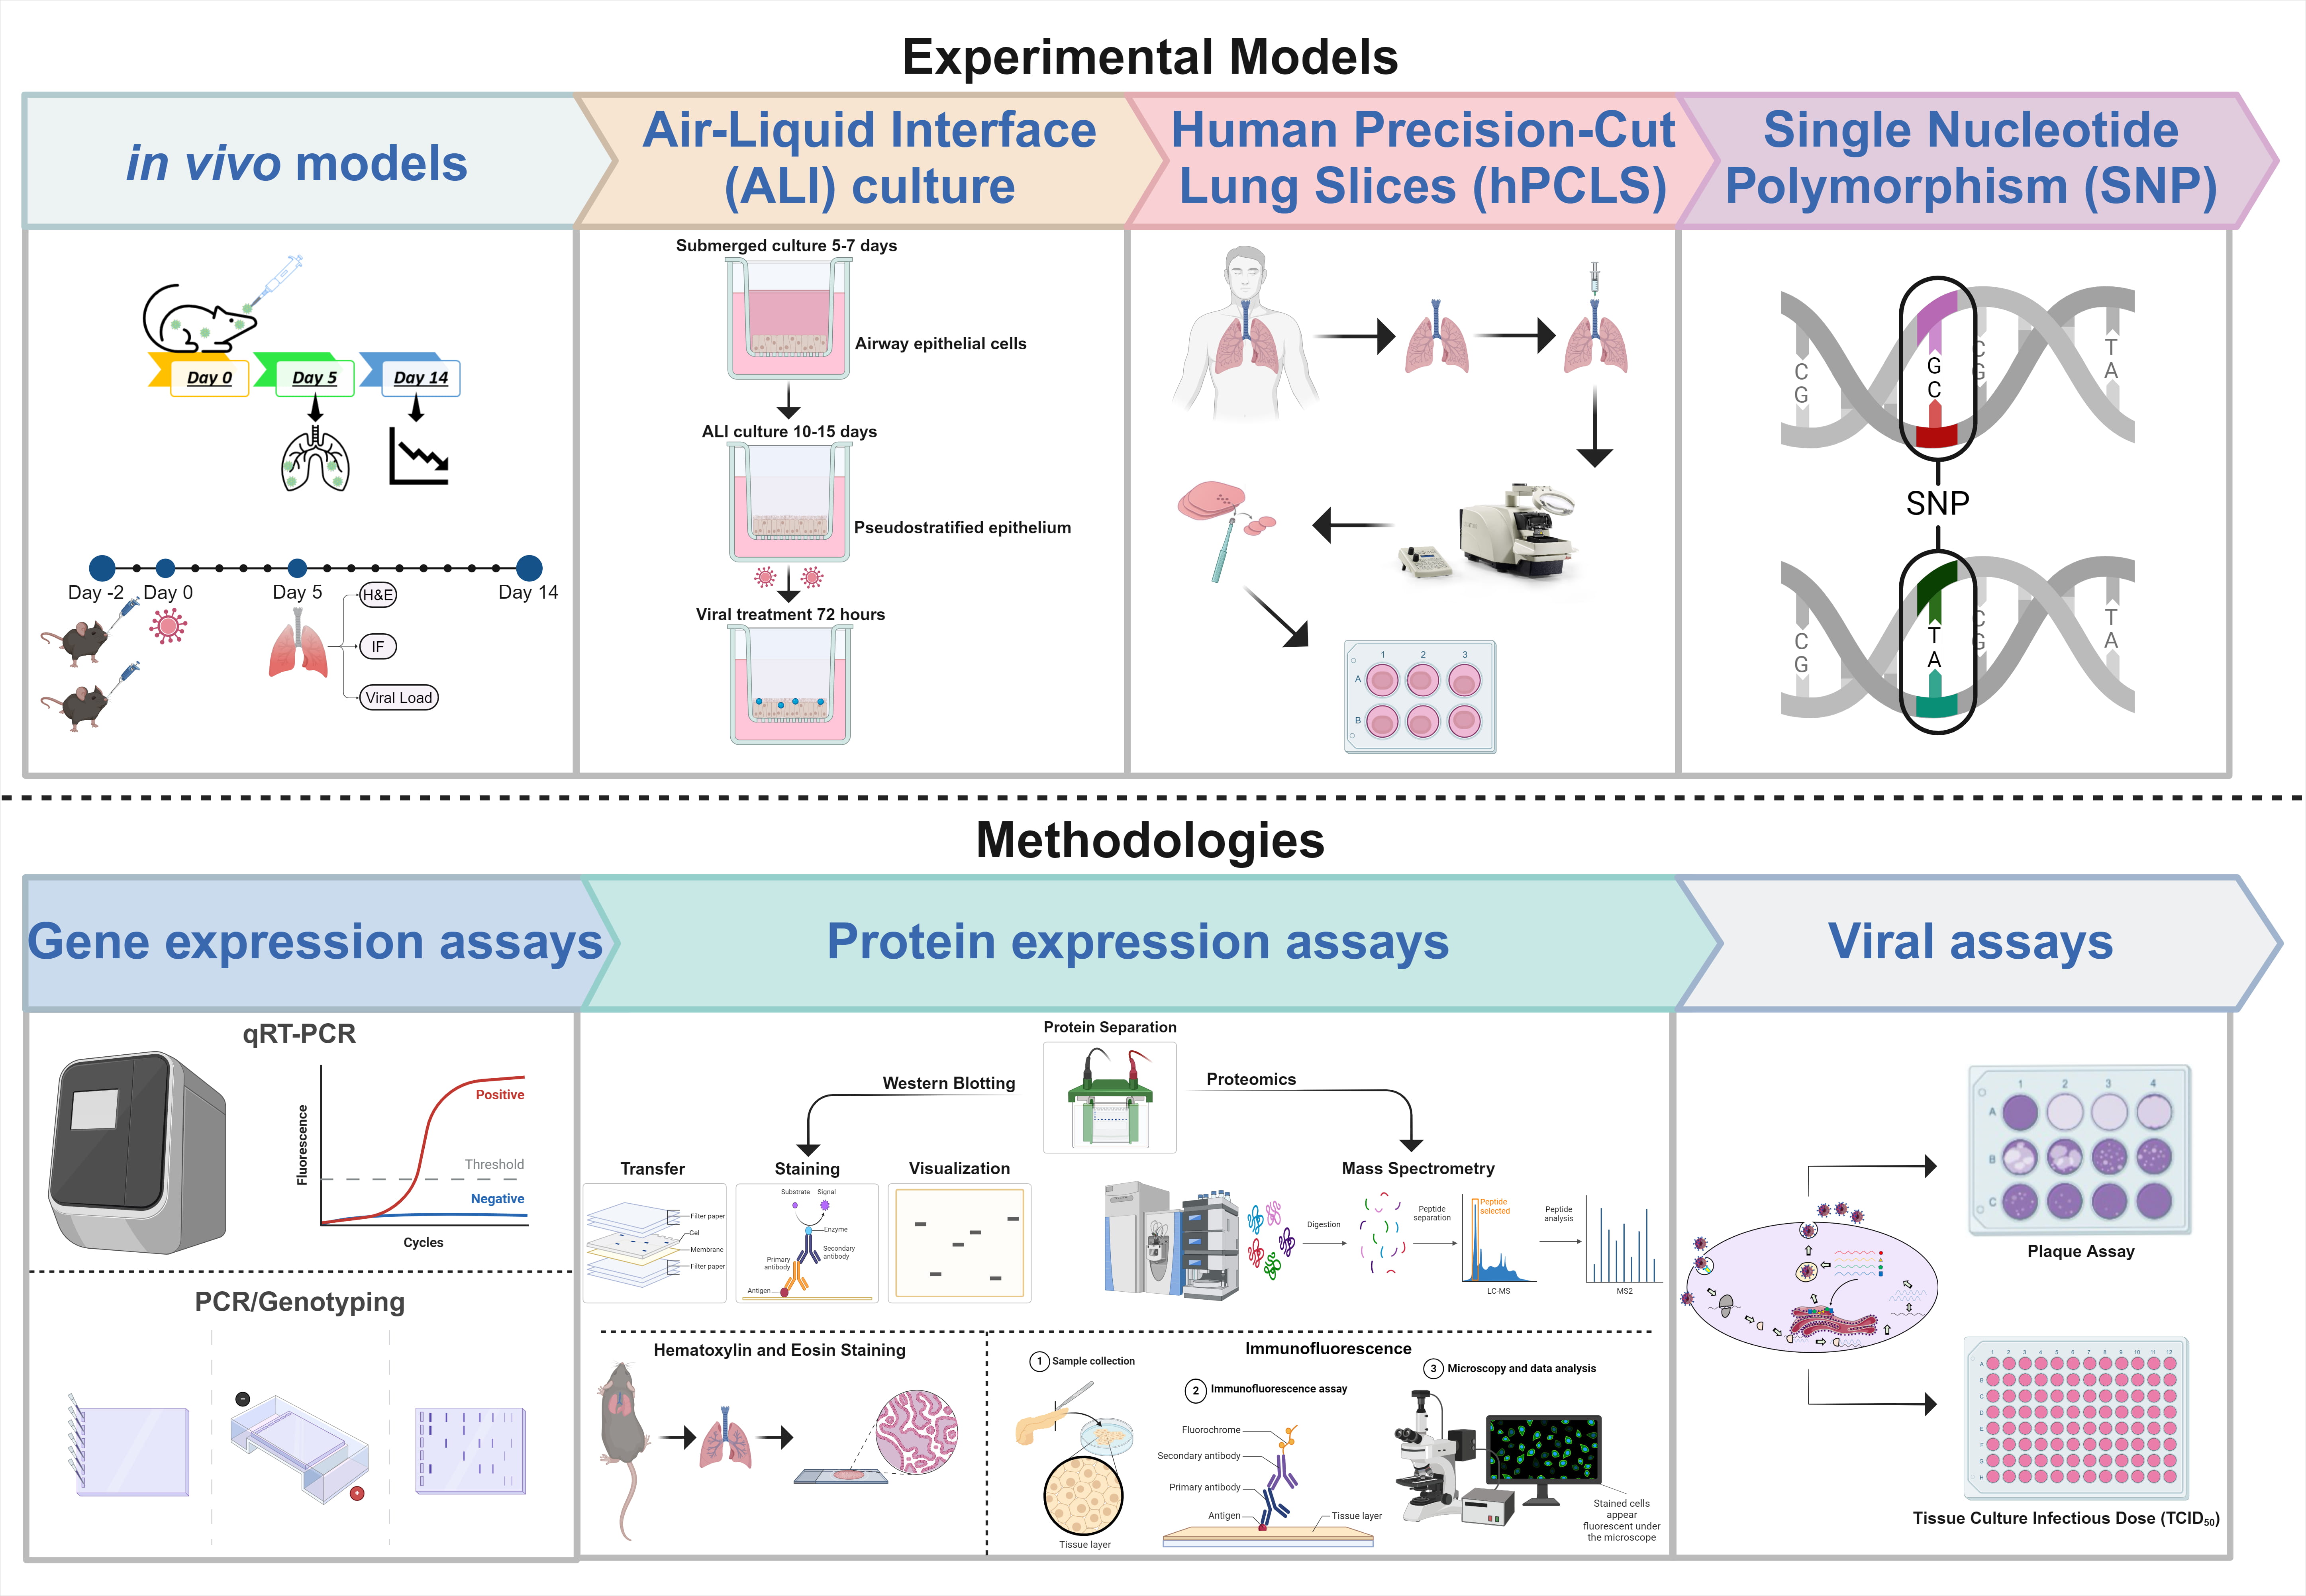 The schematic workflow provides a glimpse into the models and methods we employ in our laboratory for the identification of novel mechanisms how influenza A virus (IAV) hijack and subvert host cellular processes to facilitate viral replication and disease progression in the lungs. 